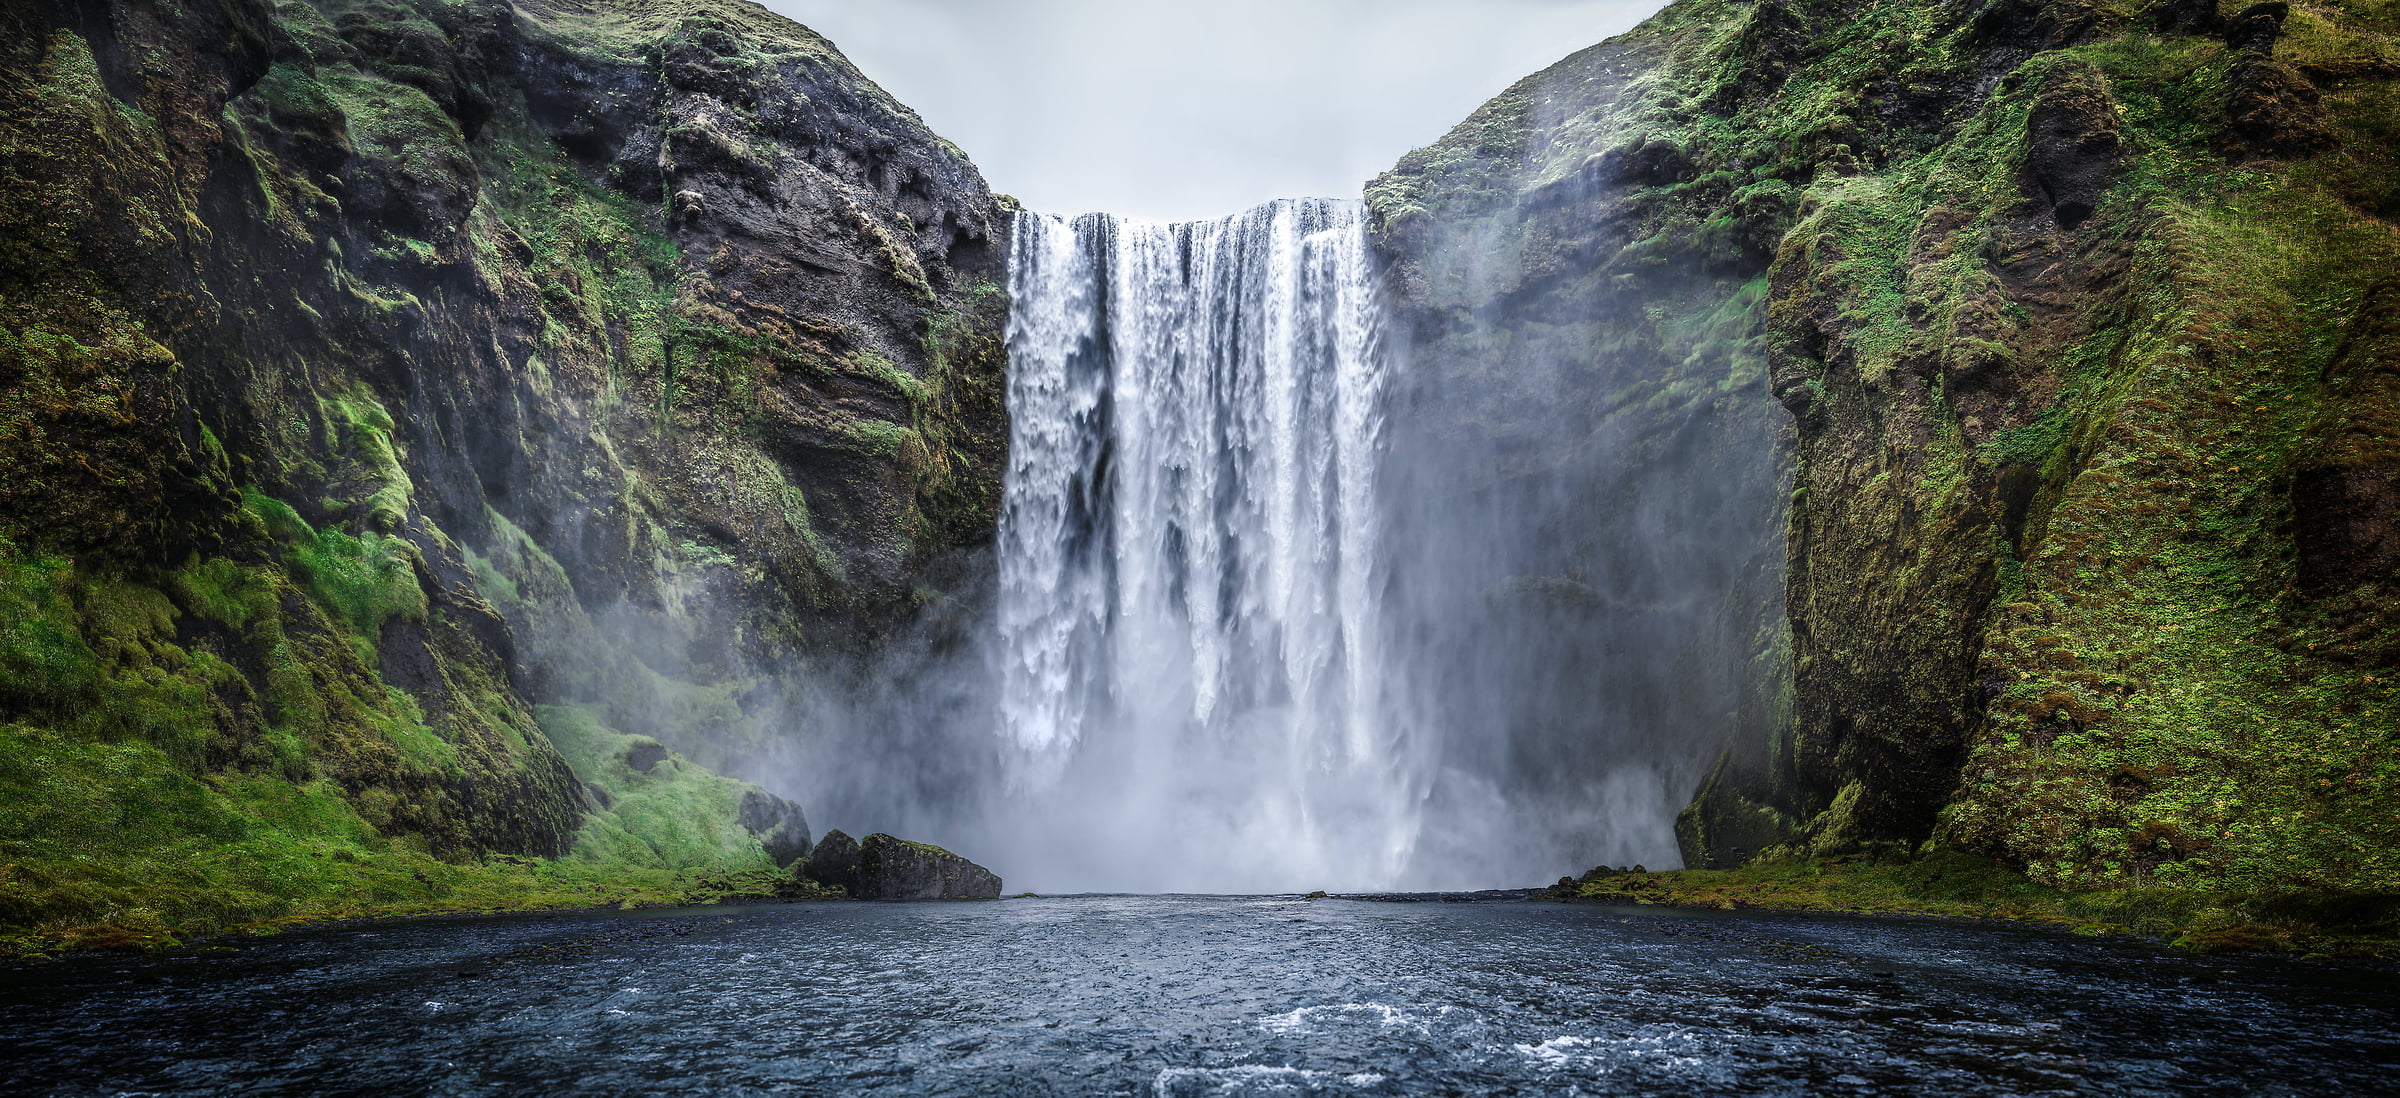 524 megapixels! A very high resolution, large-format VAST photo print of a big waterfall with a river in the foreground and green plants and moss on the sides; photograph created by Dan Piech at the Skógafoss Waterfall in Iceland